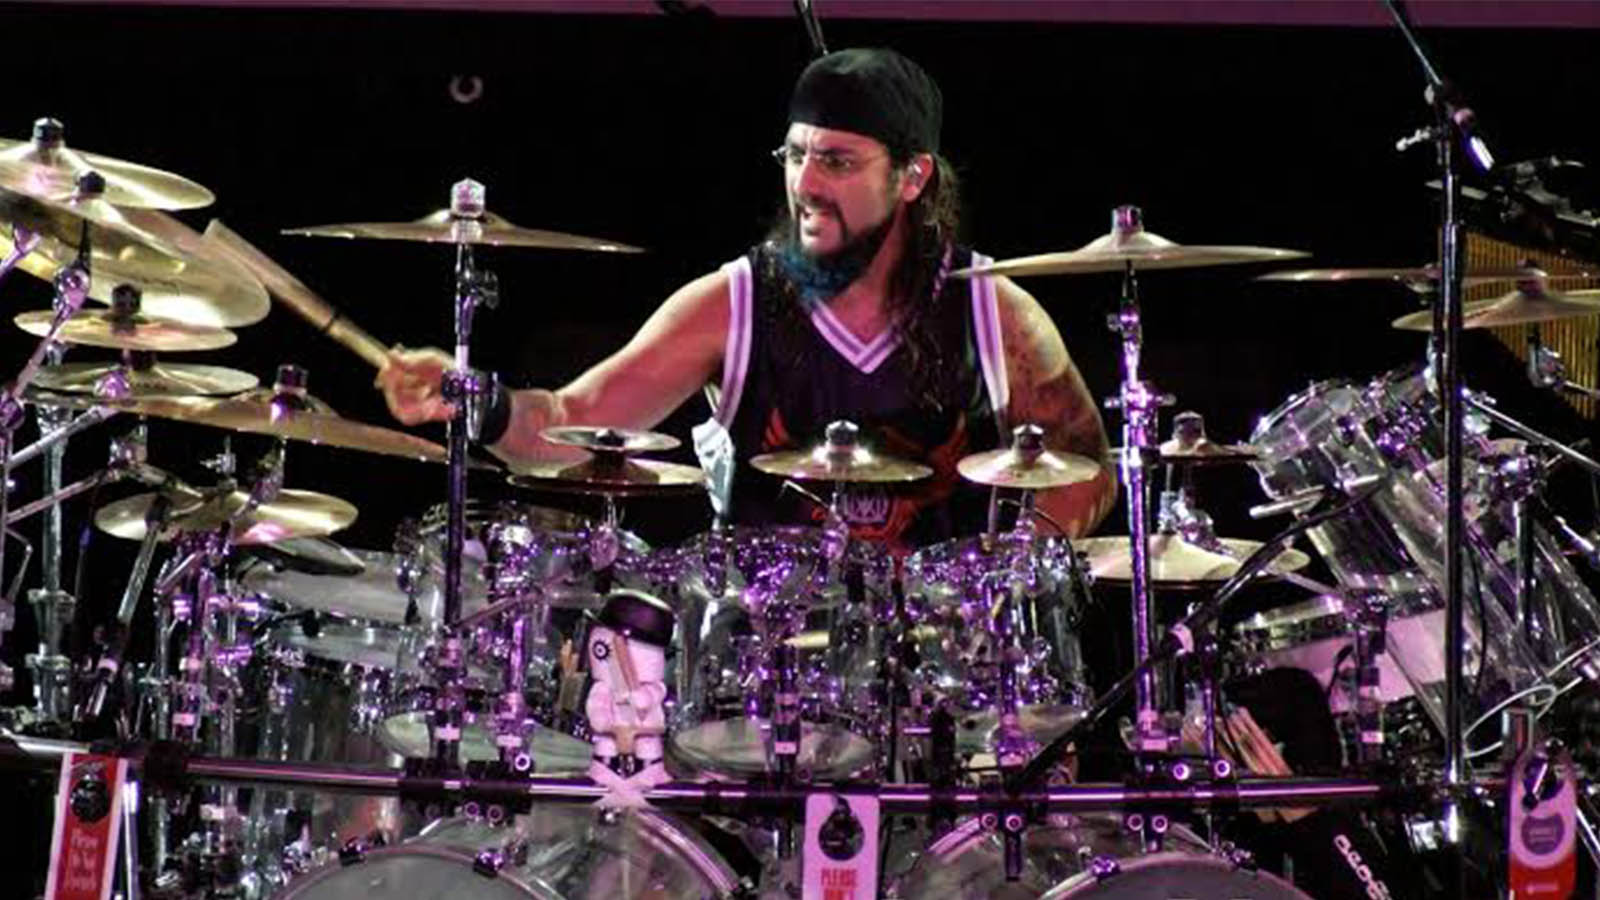 Mike Portnoy Explains His Dream Theater Exit: "I Needed A Break"